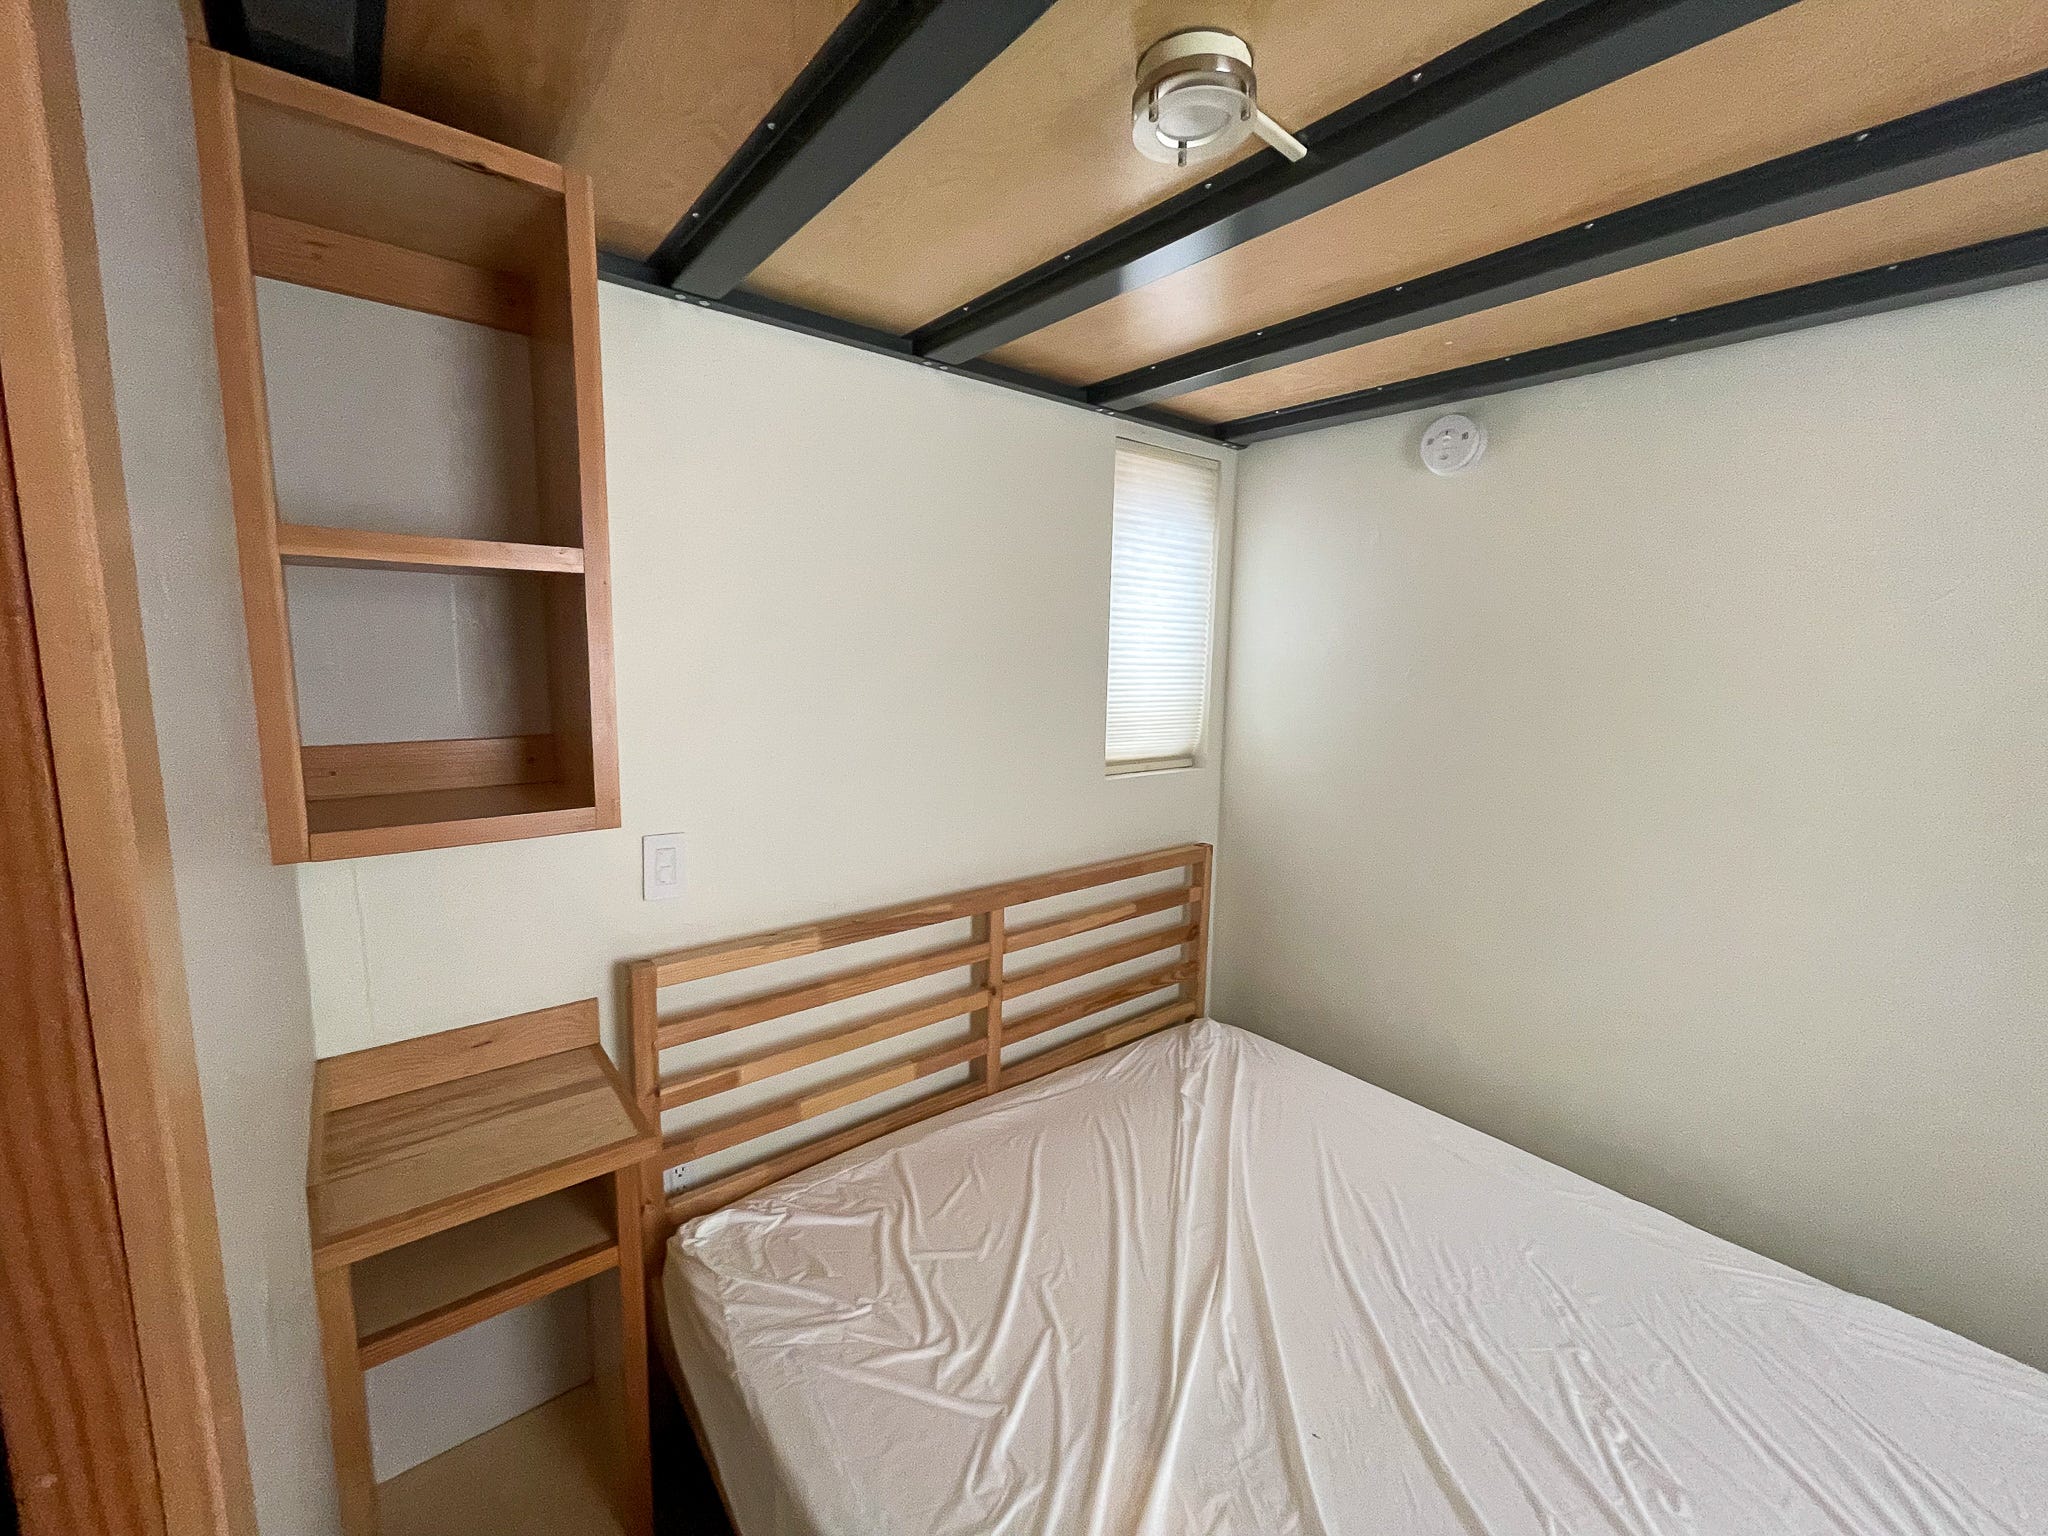 The interior of tiny homes owned by Aspen Skiing Company at the Aspen Basalt Campground in Colorado.